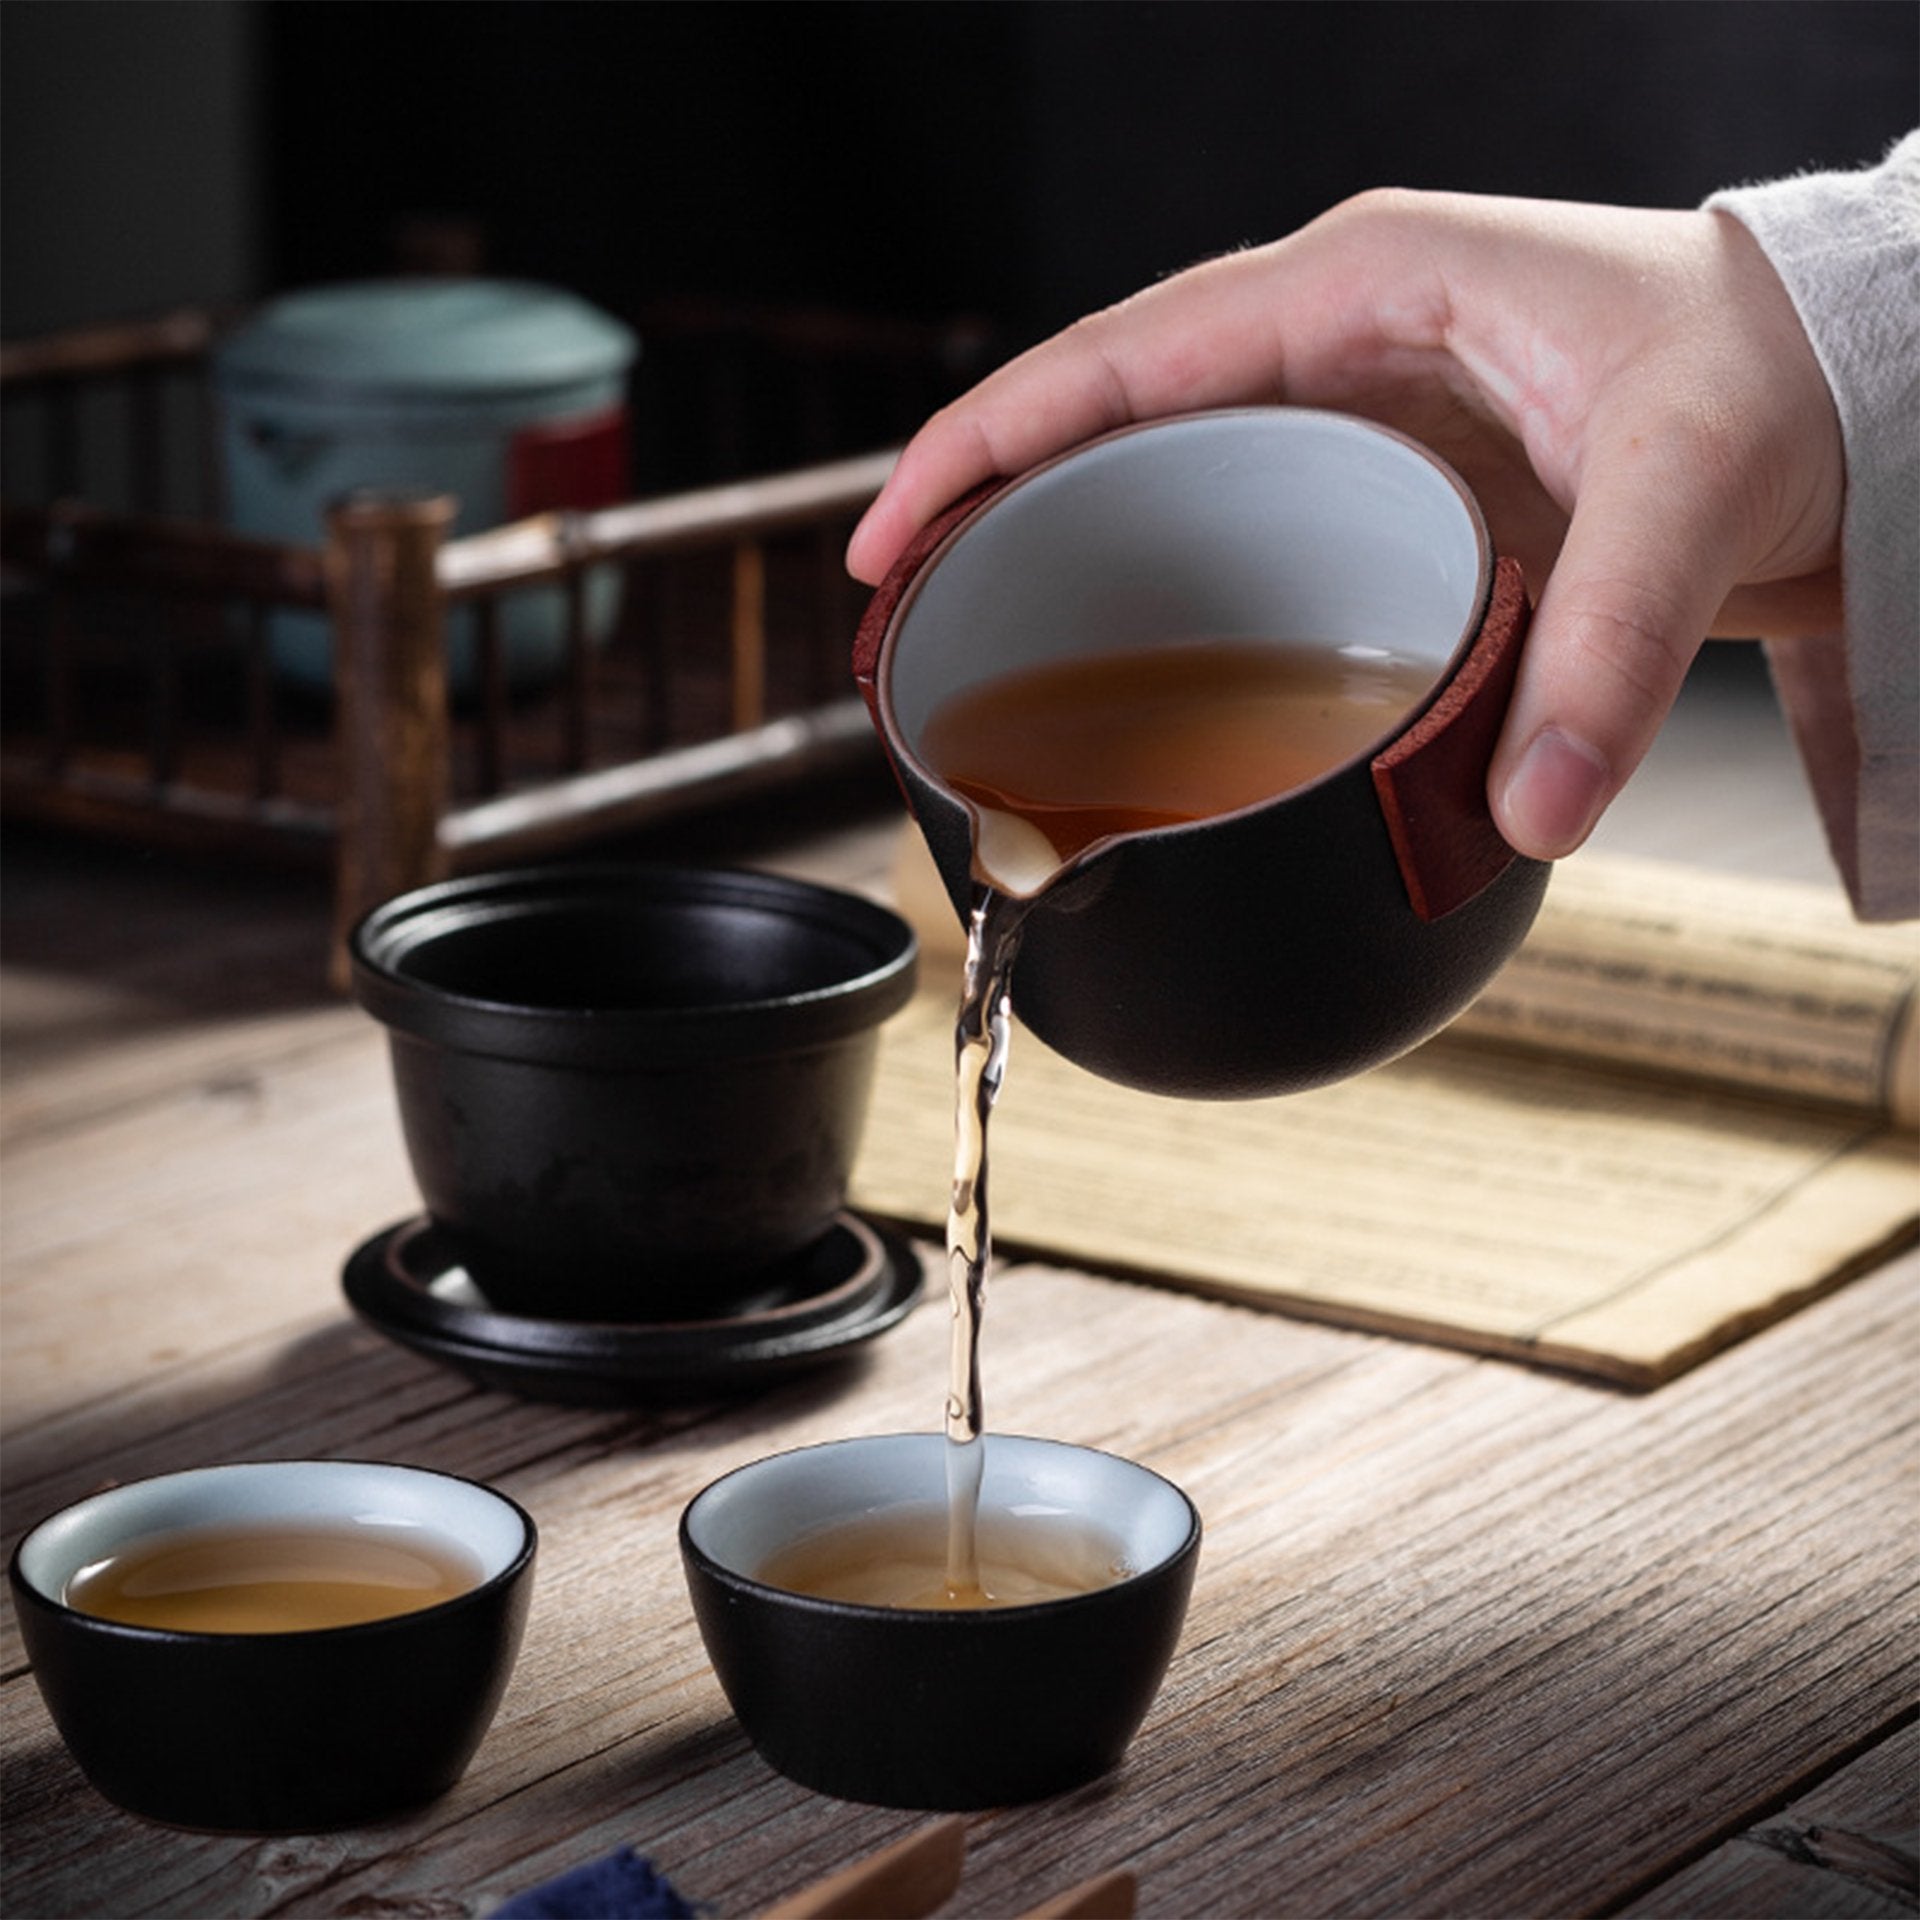 Hand pouring tea from a black pot into a cup on a wooden table with more tea accessories in the background.